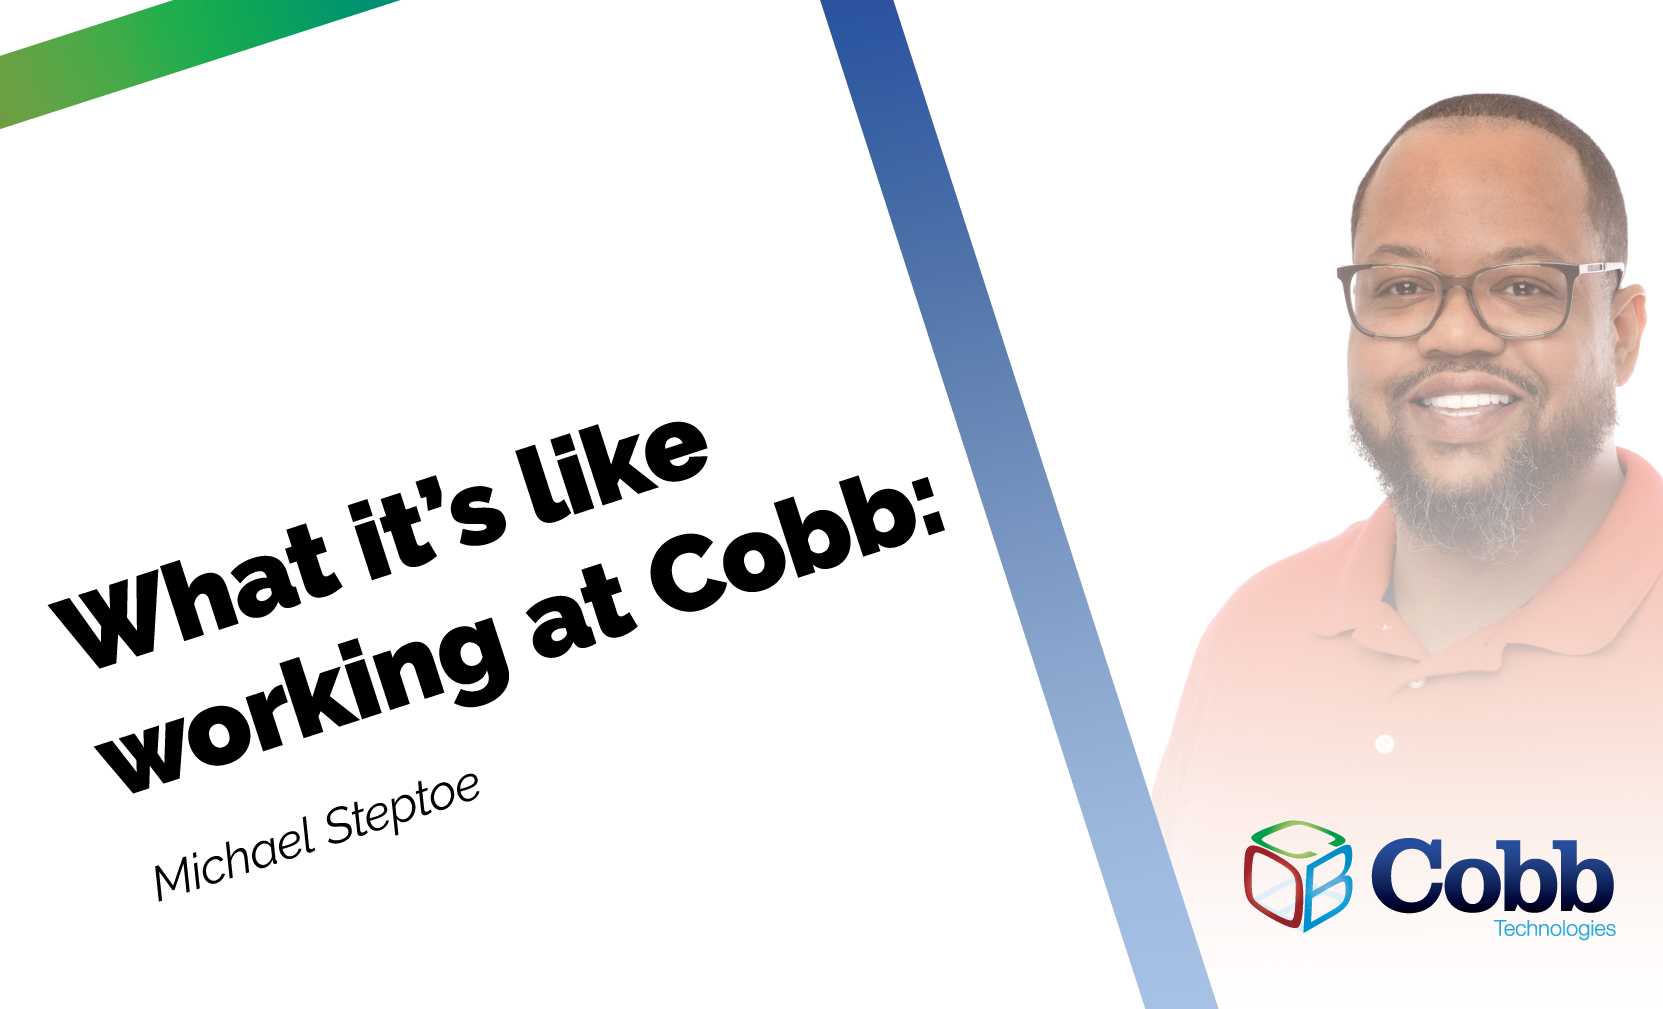 What it's like to work at Cobb: Michael Steptoe